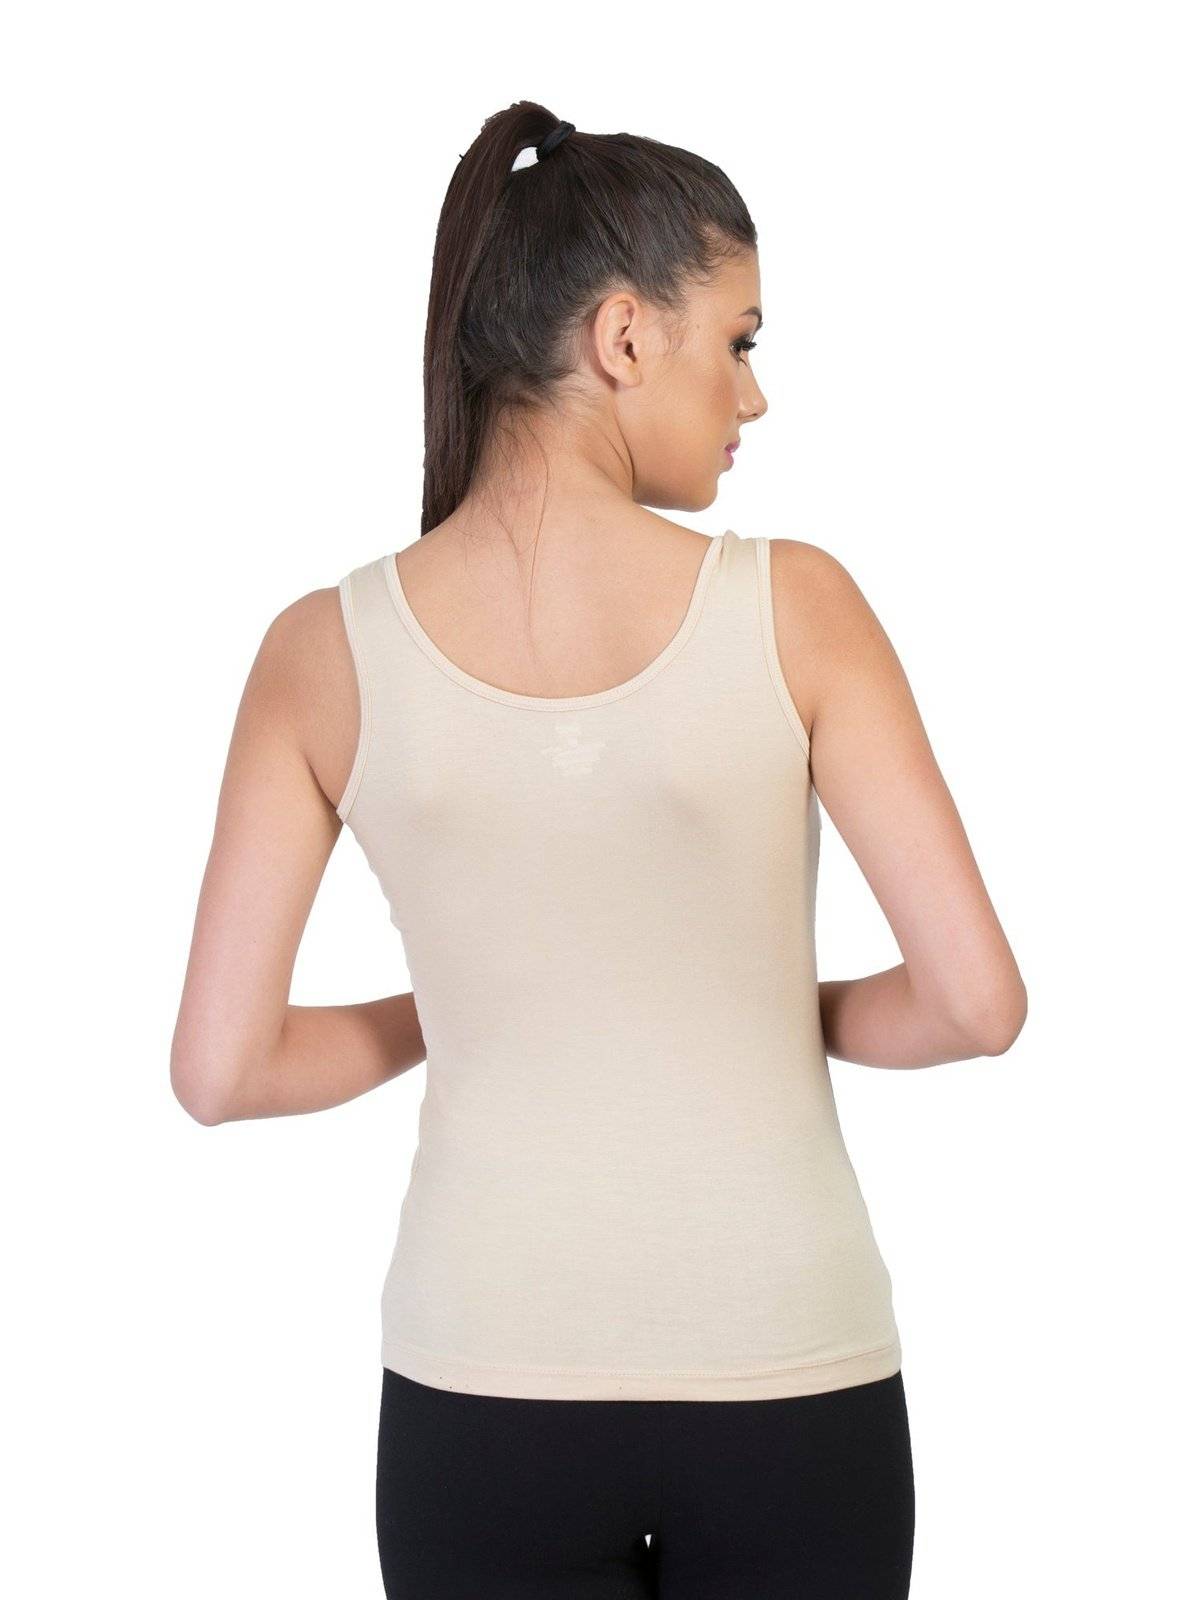 Envie Tank top, Slip, Super Soft Modal fabric for soft touch comfort